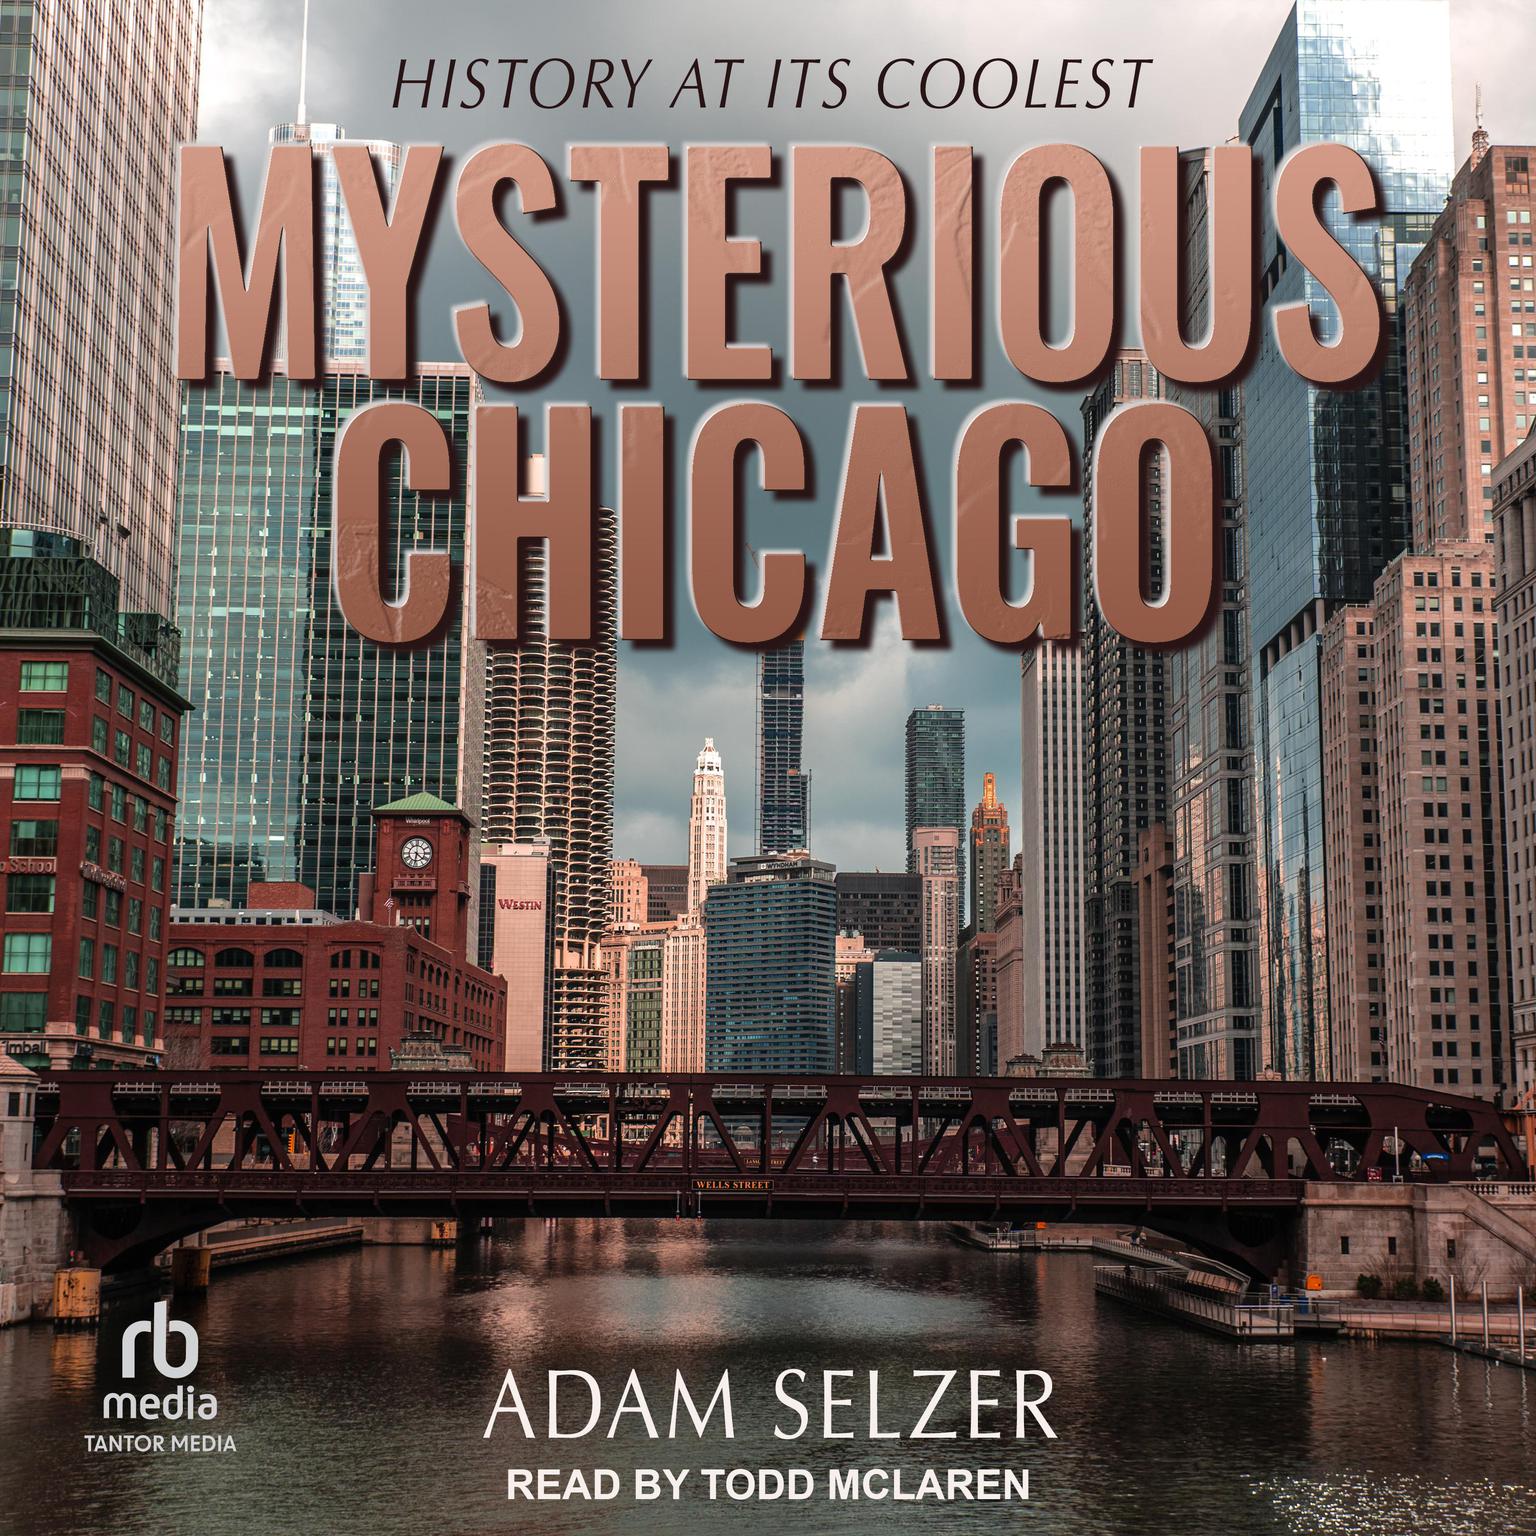 Mysterious Chicago: History at Its Coolest Audiobook, by Adam Selzer